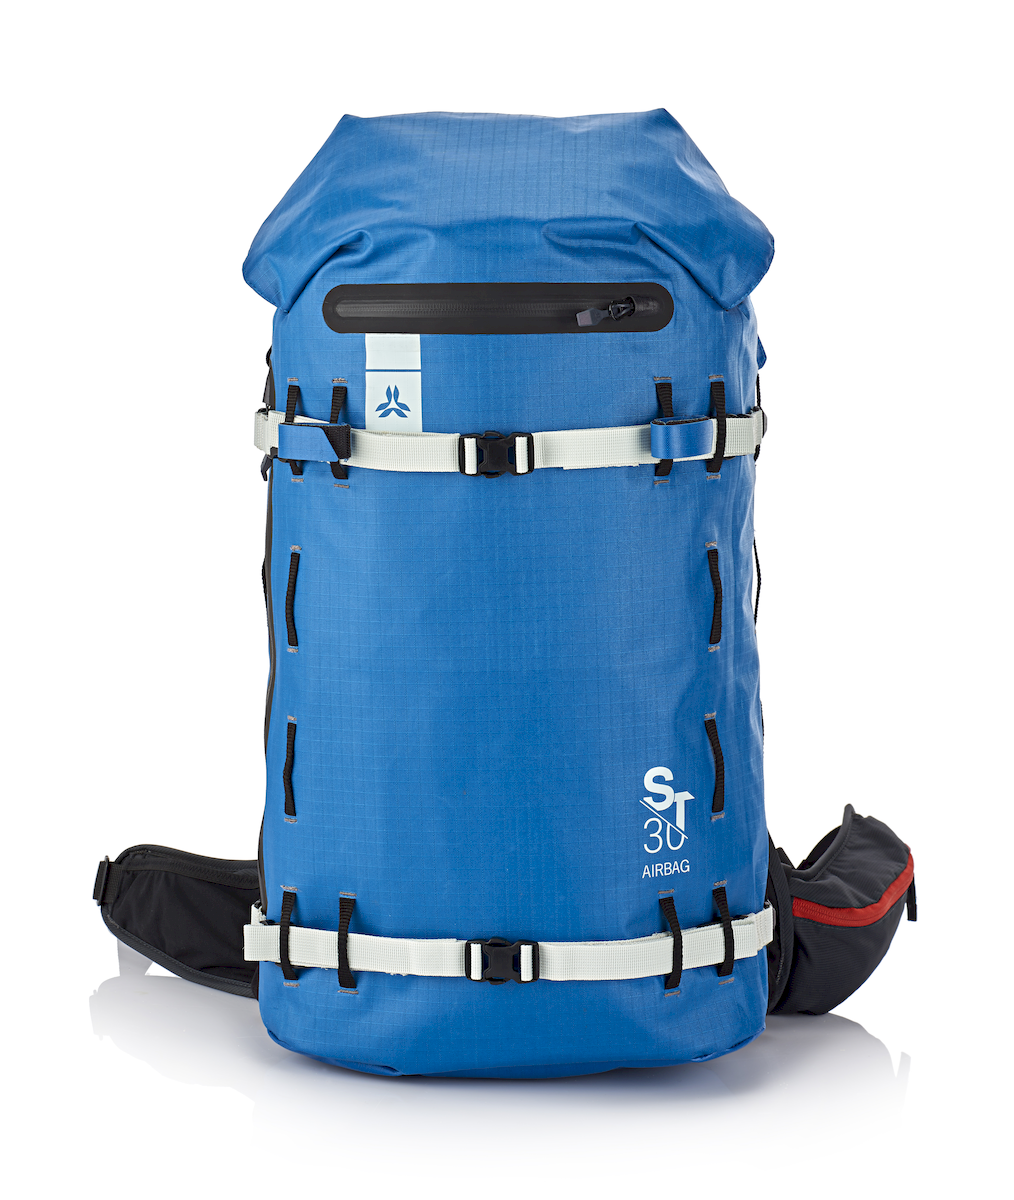 Arva Airbag Reactor ST 30 - Avalanche airbag backpack